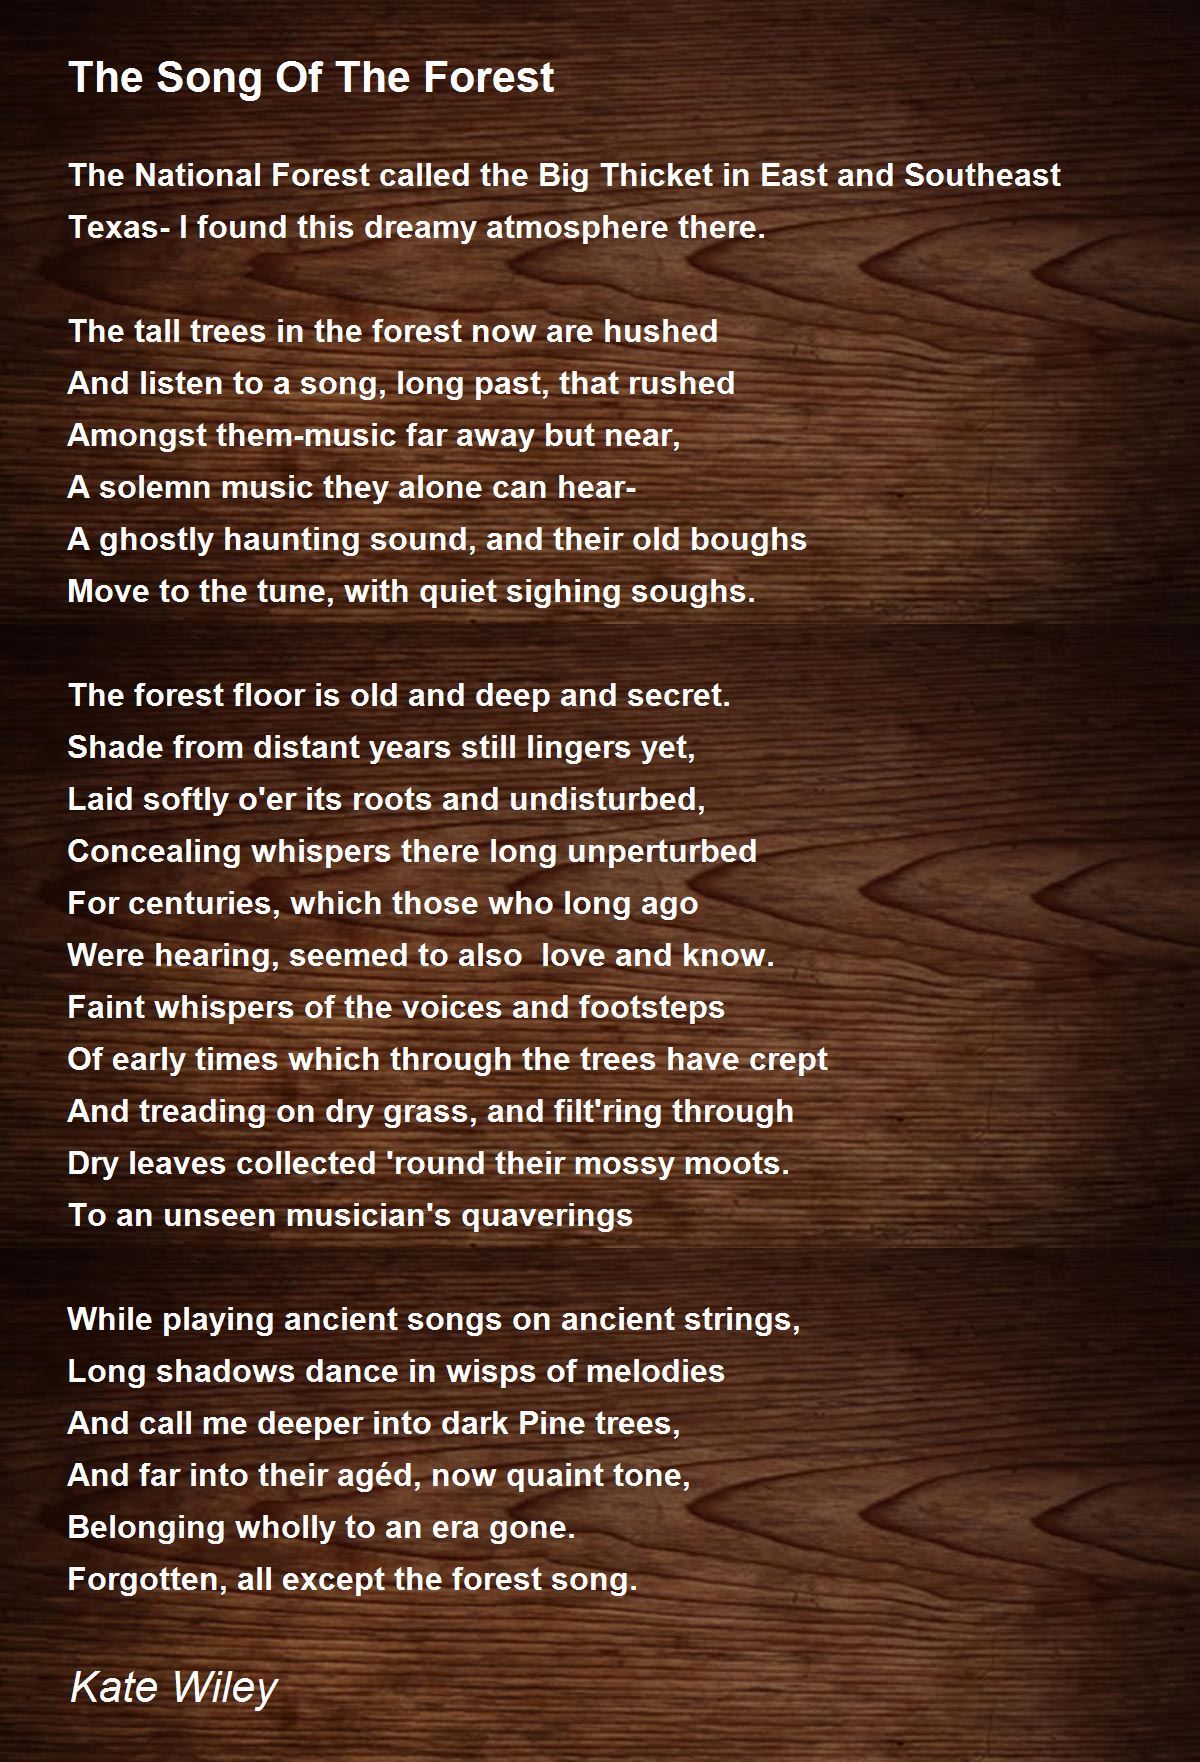 https://img.poemhunter.com/i/poem_images/015/the-song-of-the-forest.jpg